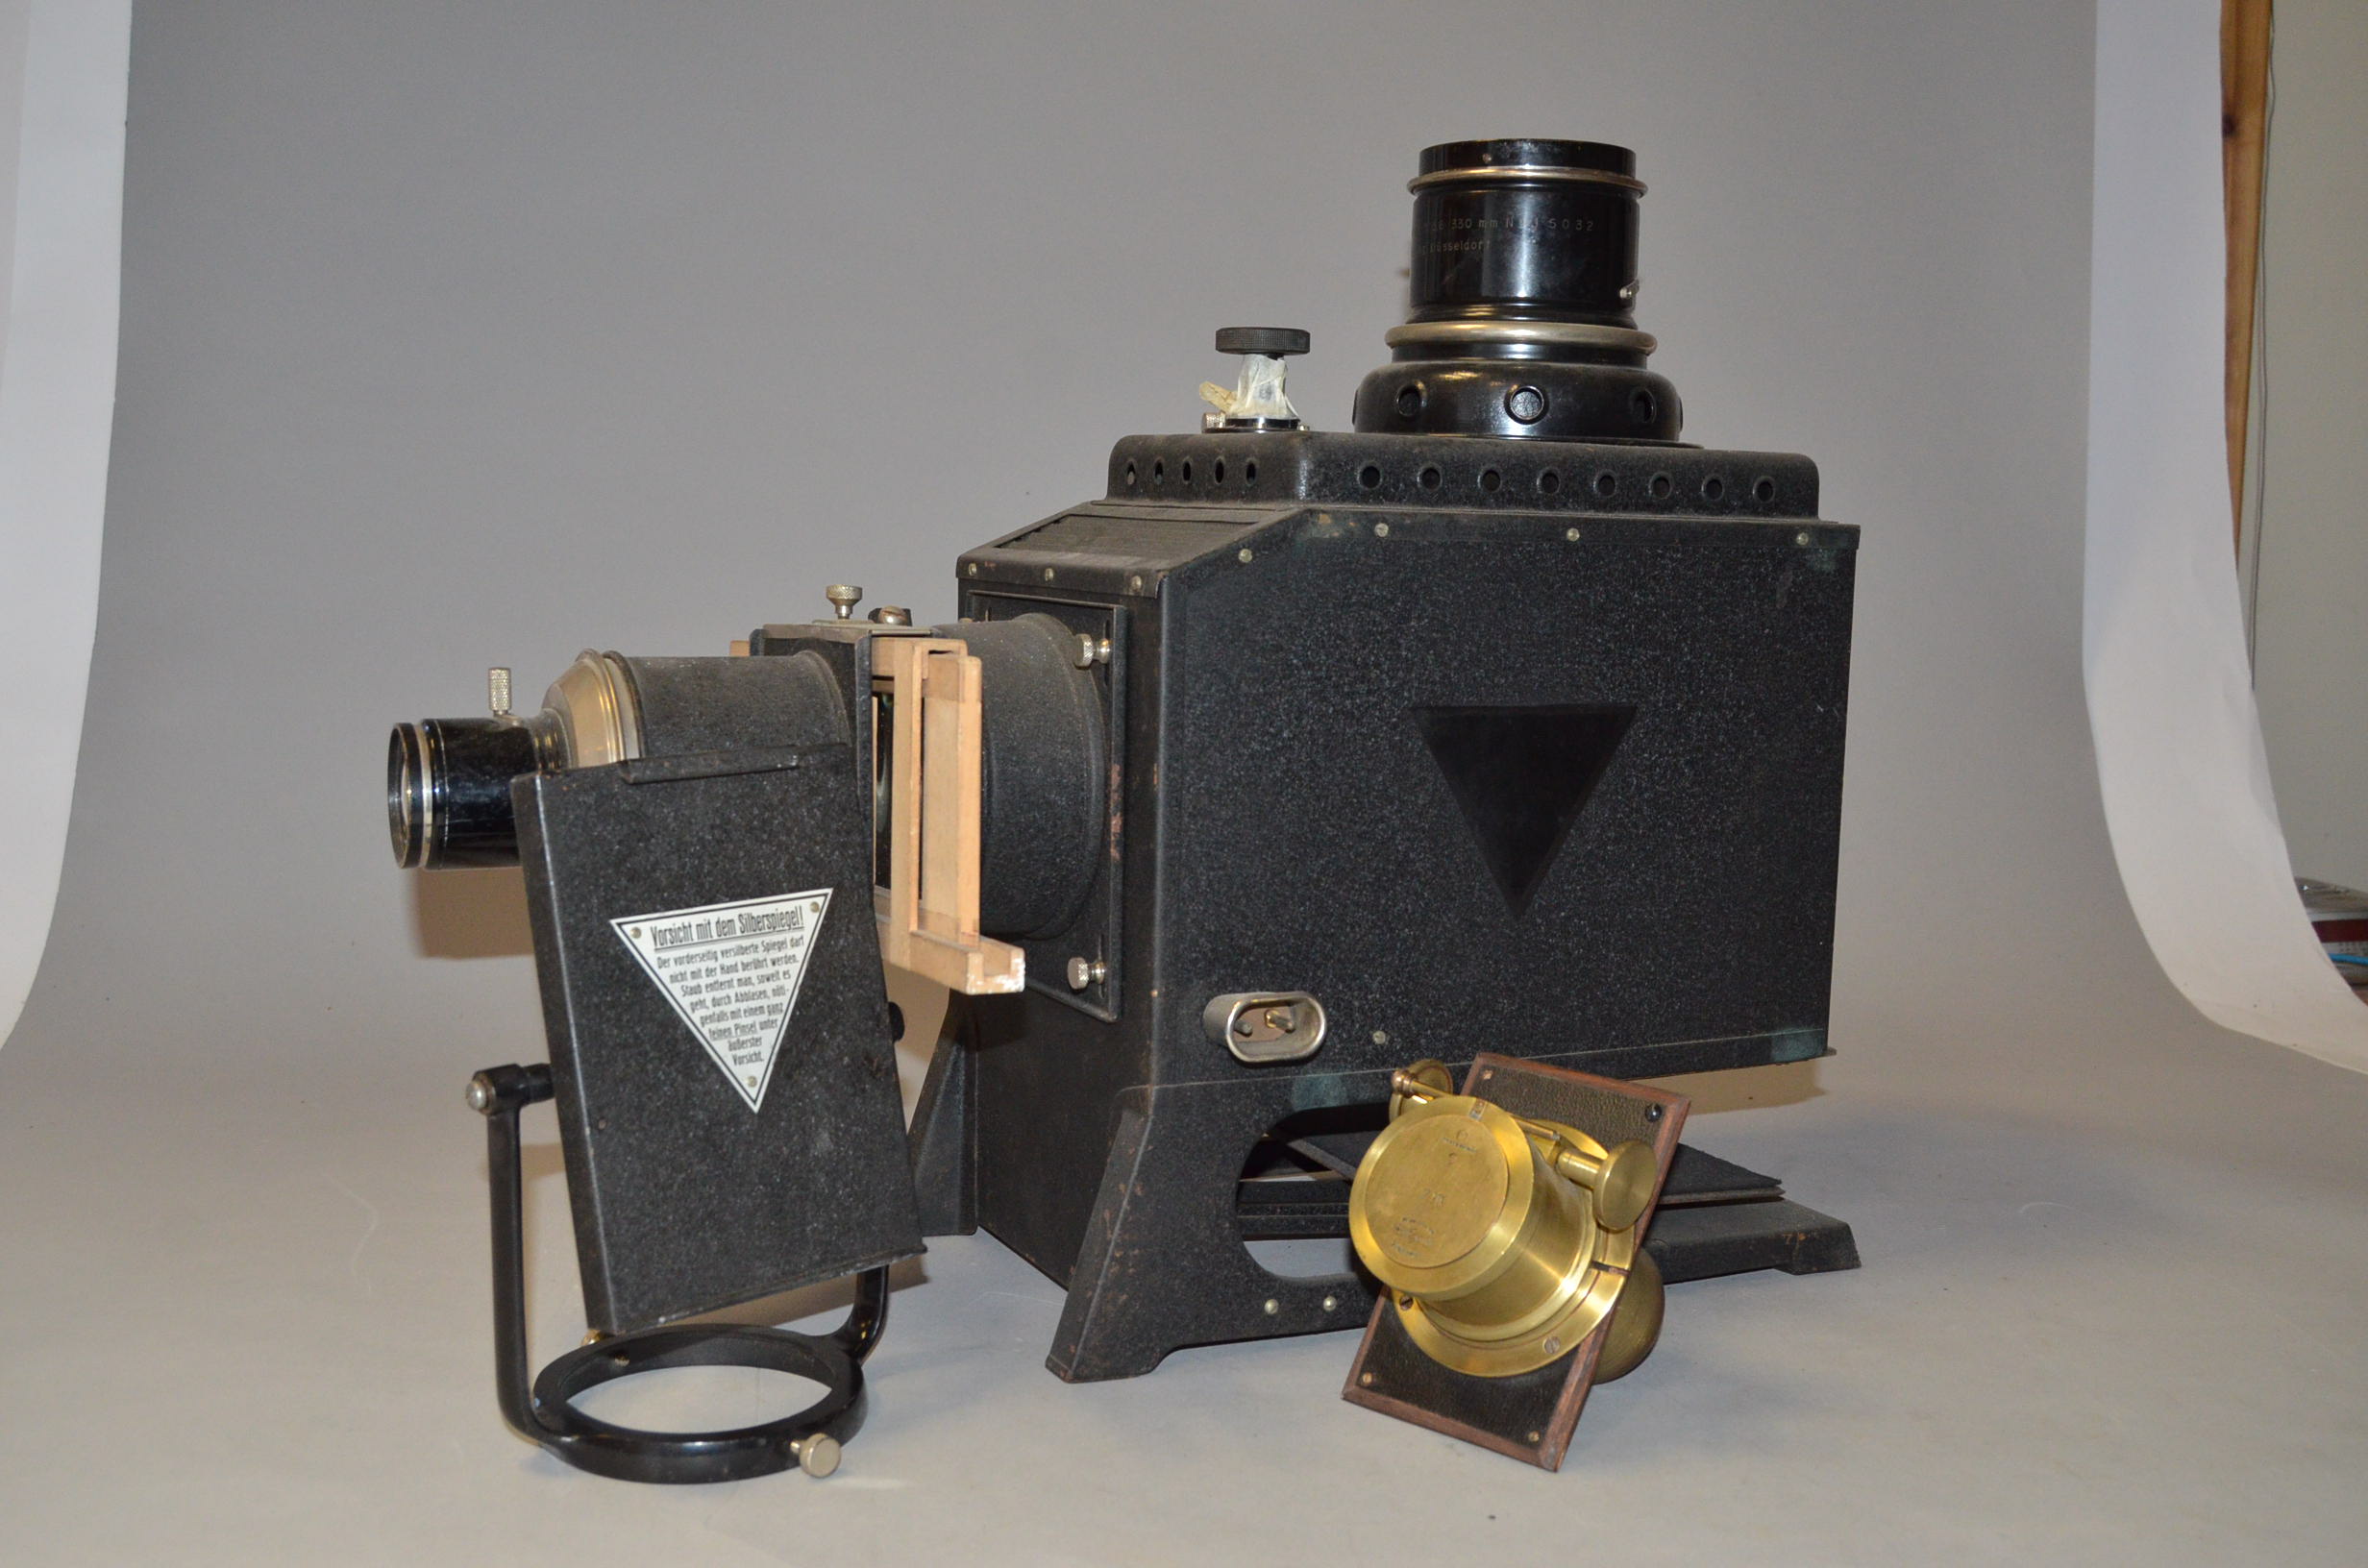 A Liesegang Epidiascope, with a Liesegang Binal 15cm front projection lens and Liesegang 330mm f/3.6